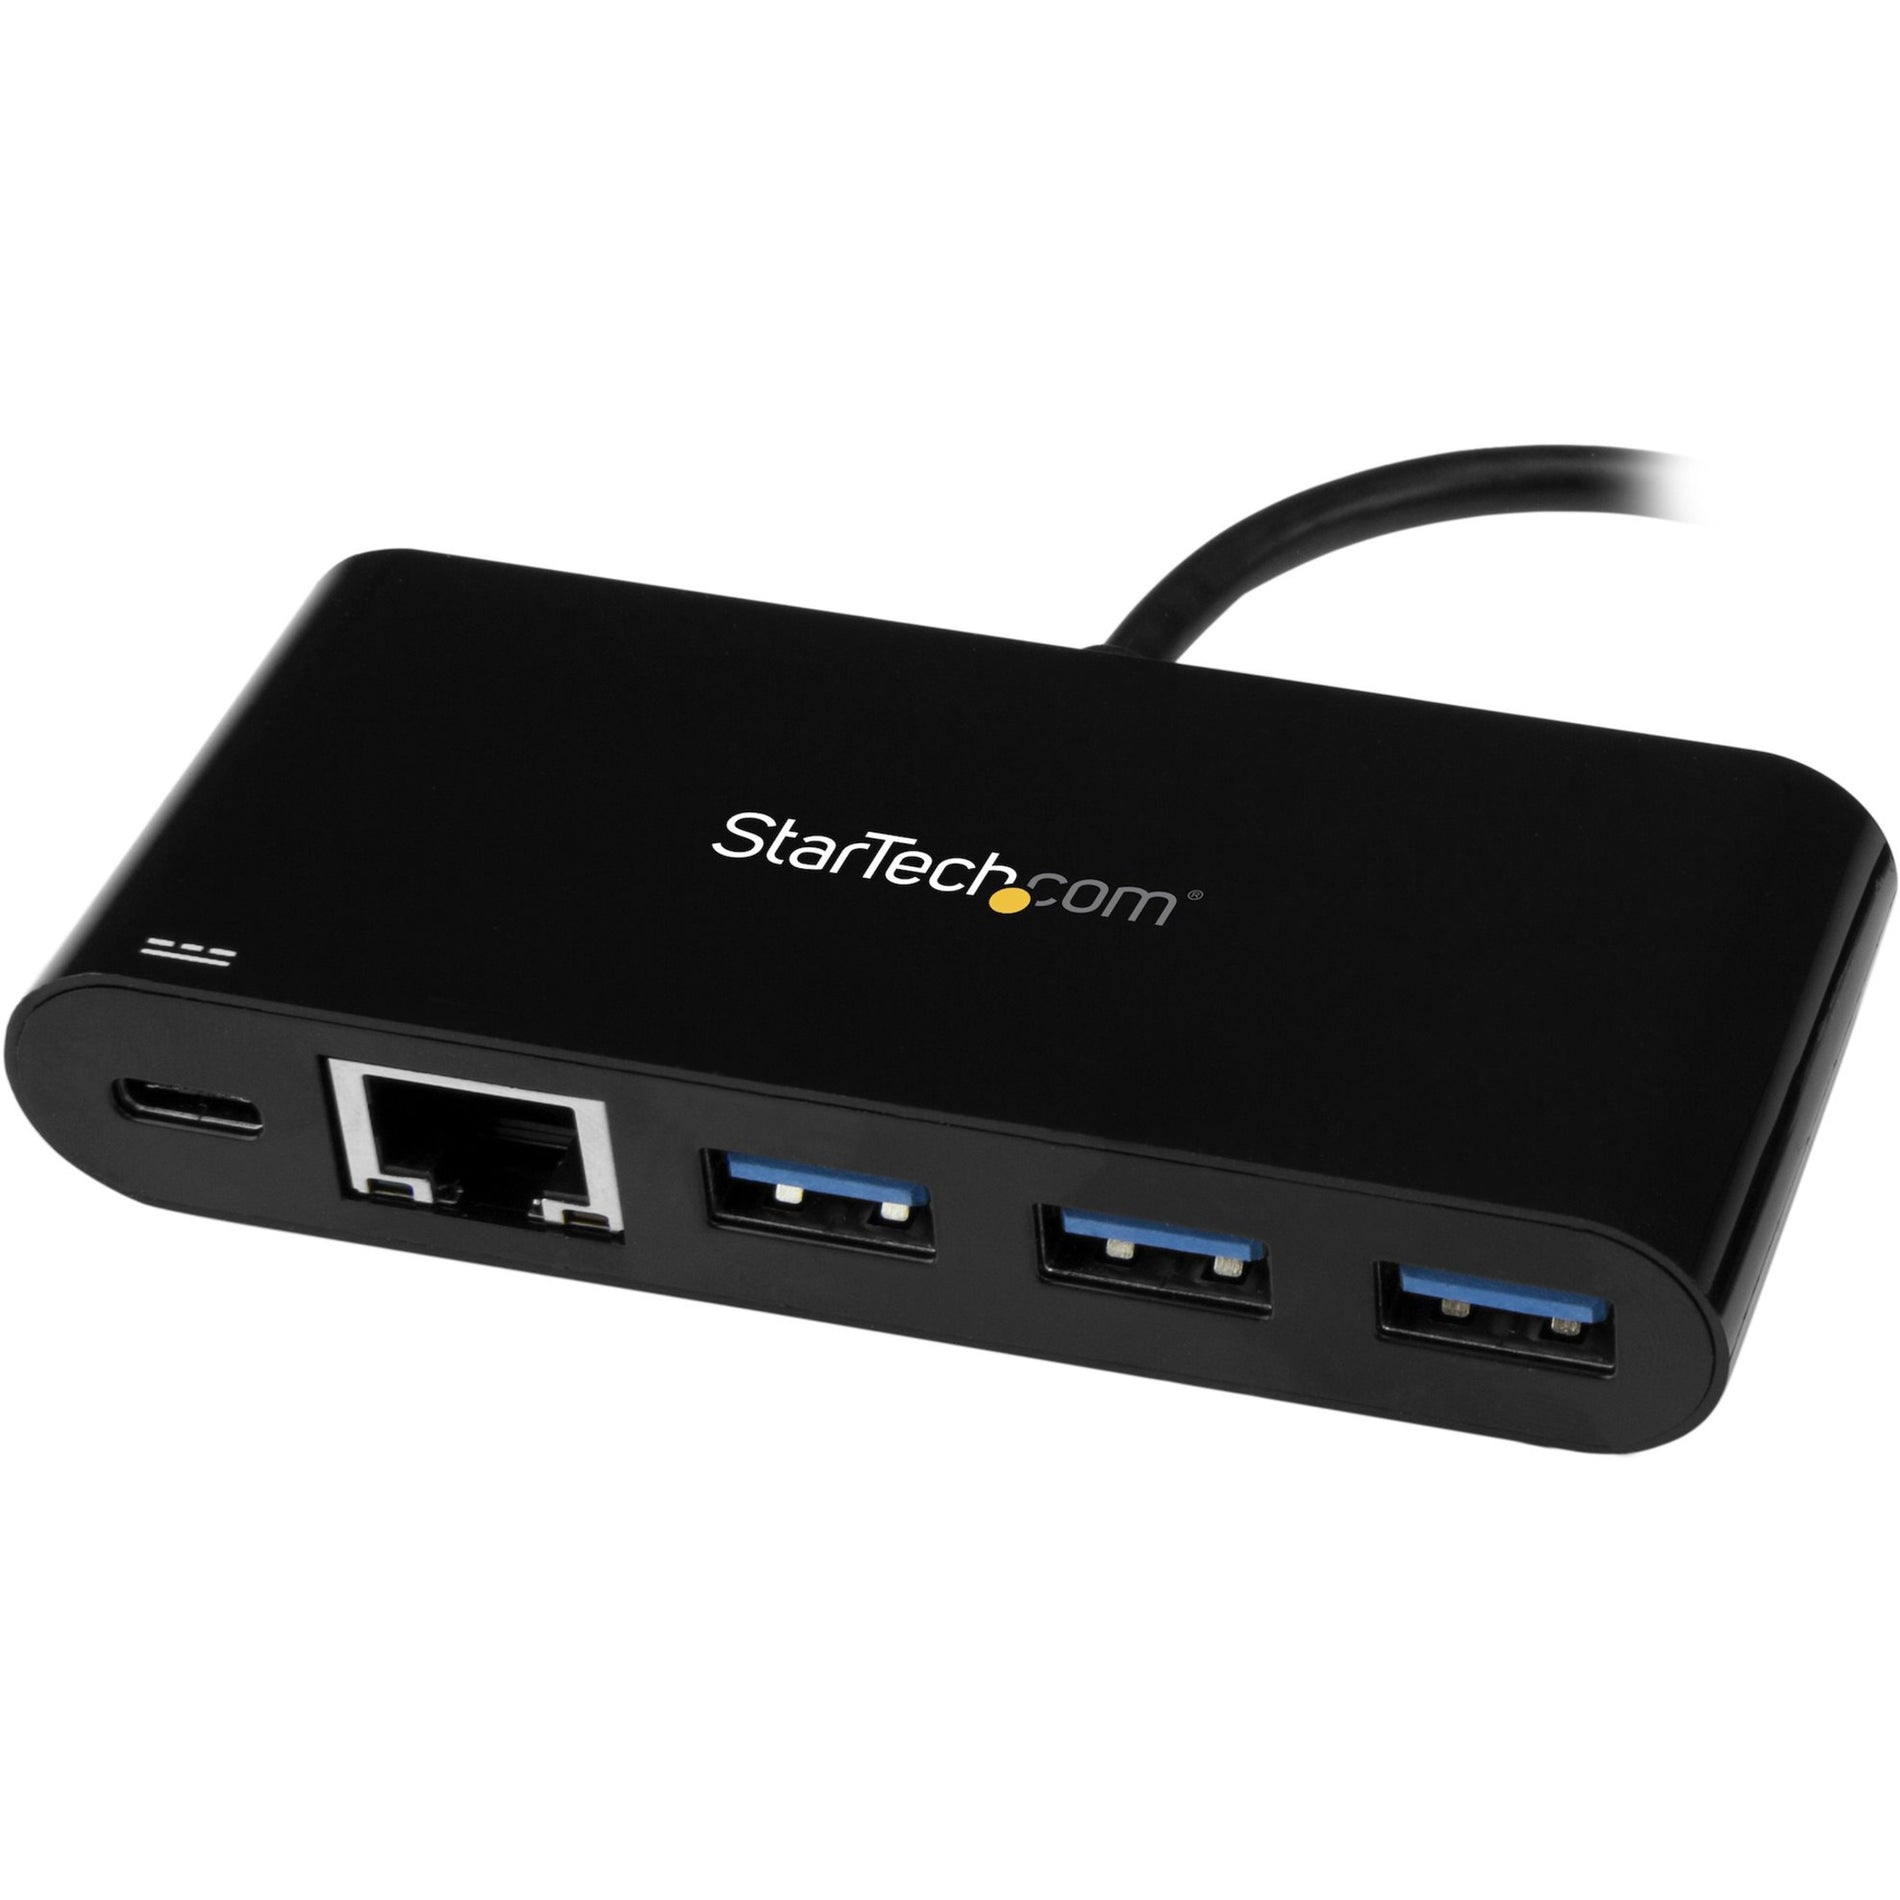 StarTech.com US1GC303APD USB-C to Ethernet Adapter with 3-Port USB 3.0 Hub and Power Delivery, USB-C GbE Network Adapter + USB Hub w/ 3 USB-A Ports